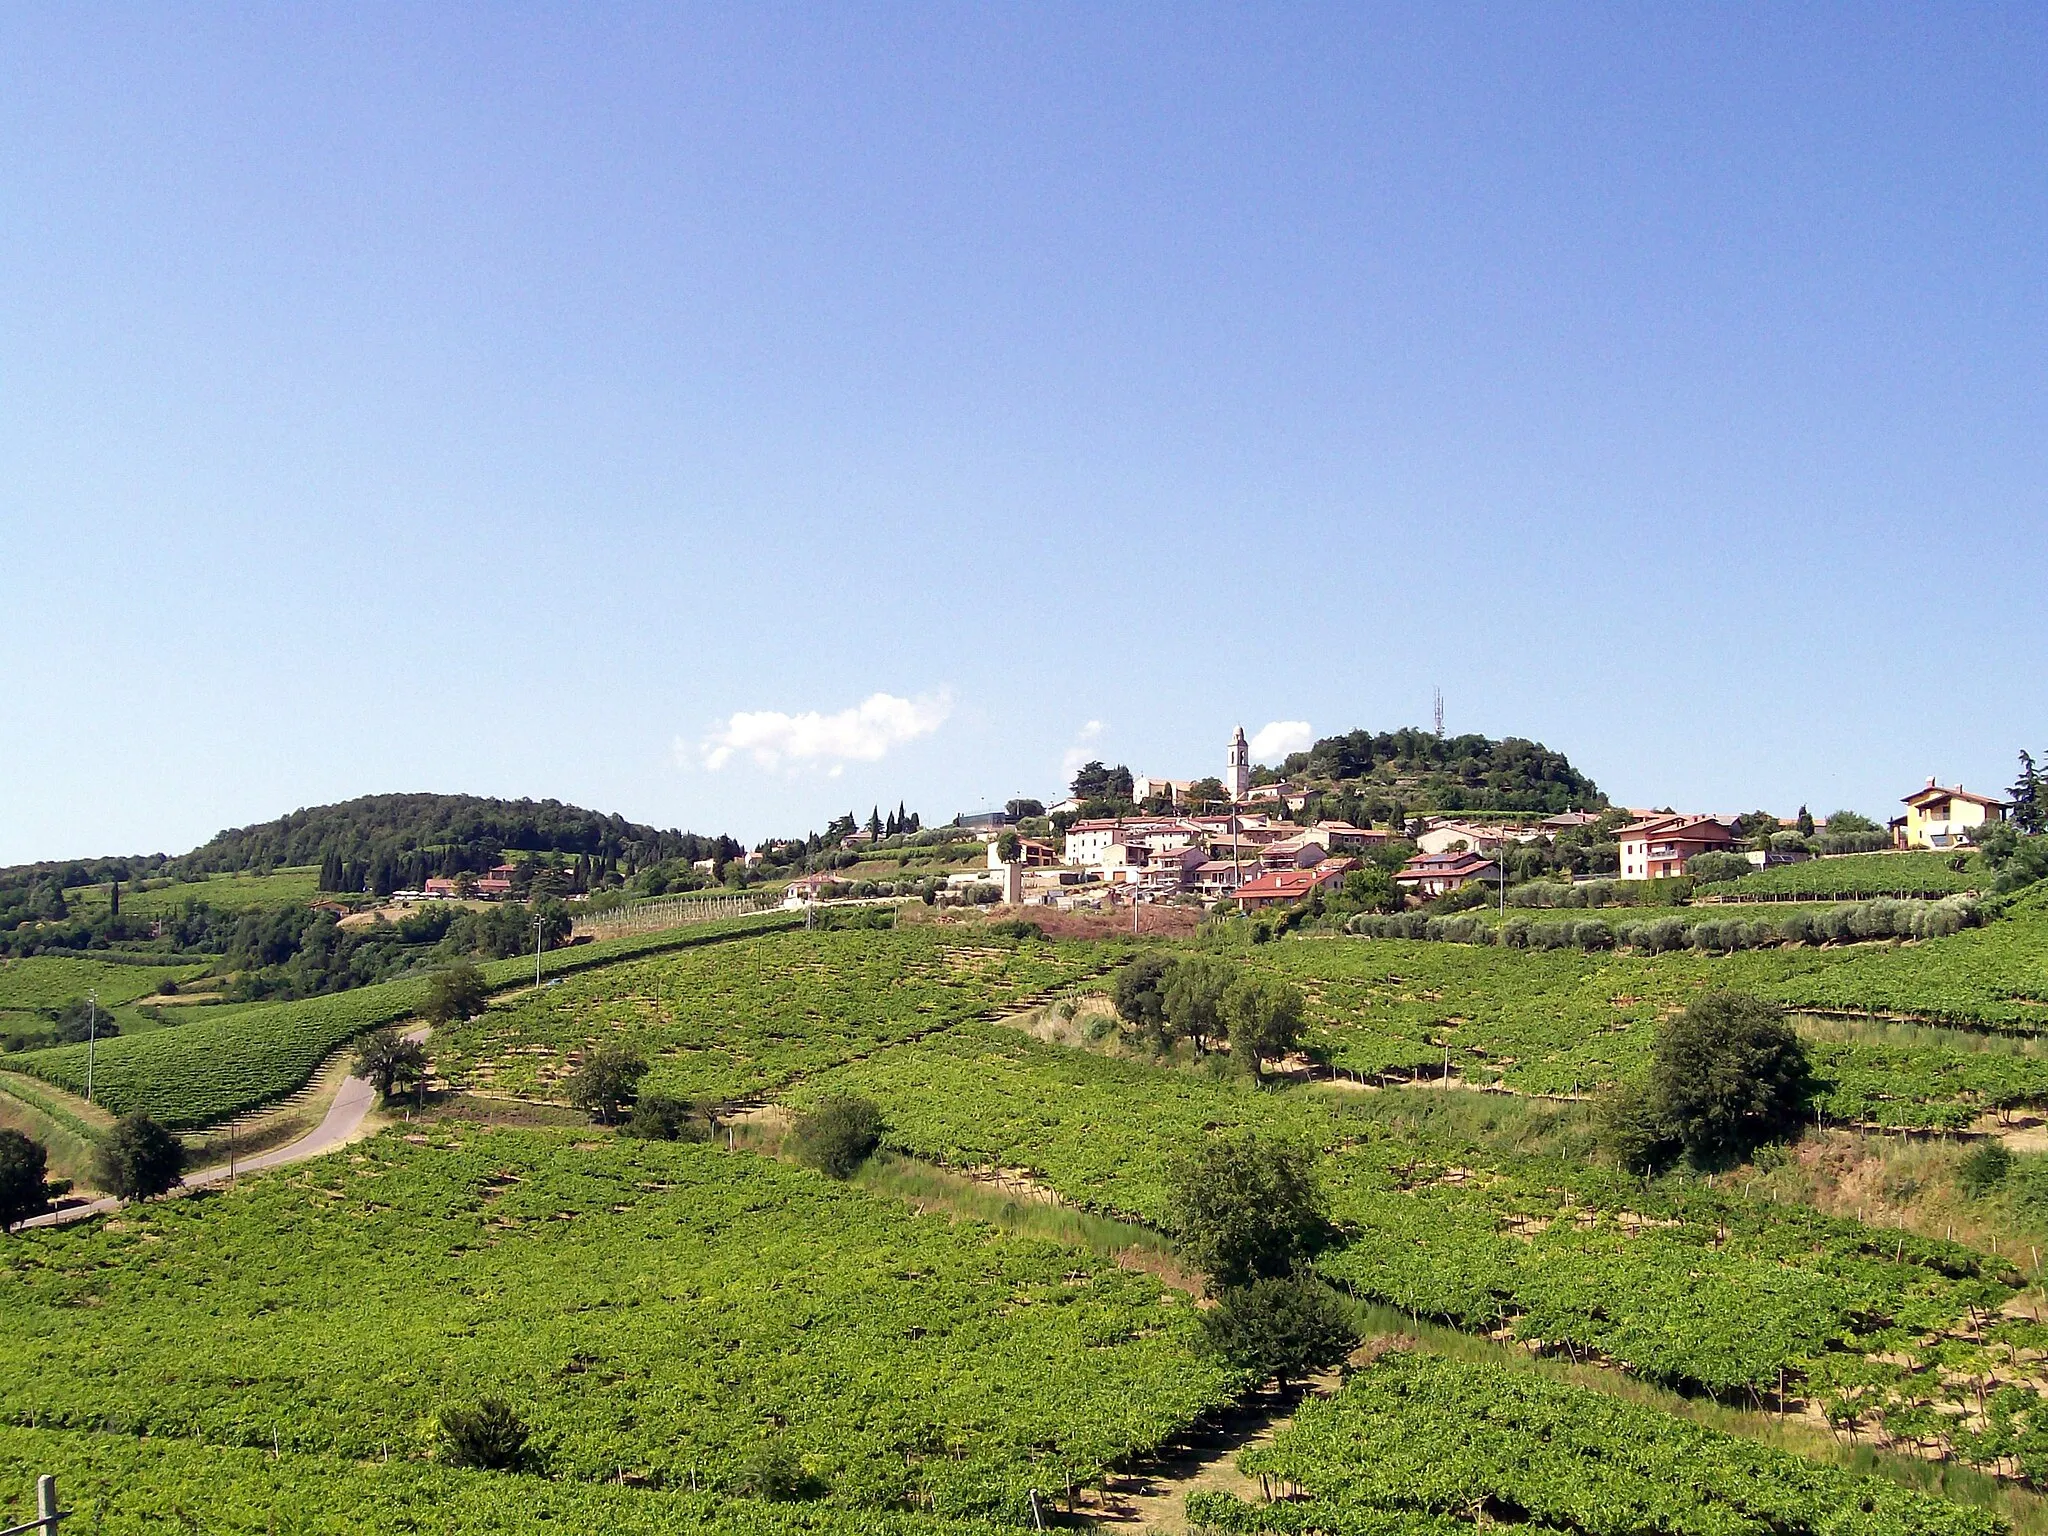 Image of Soave